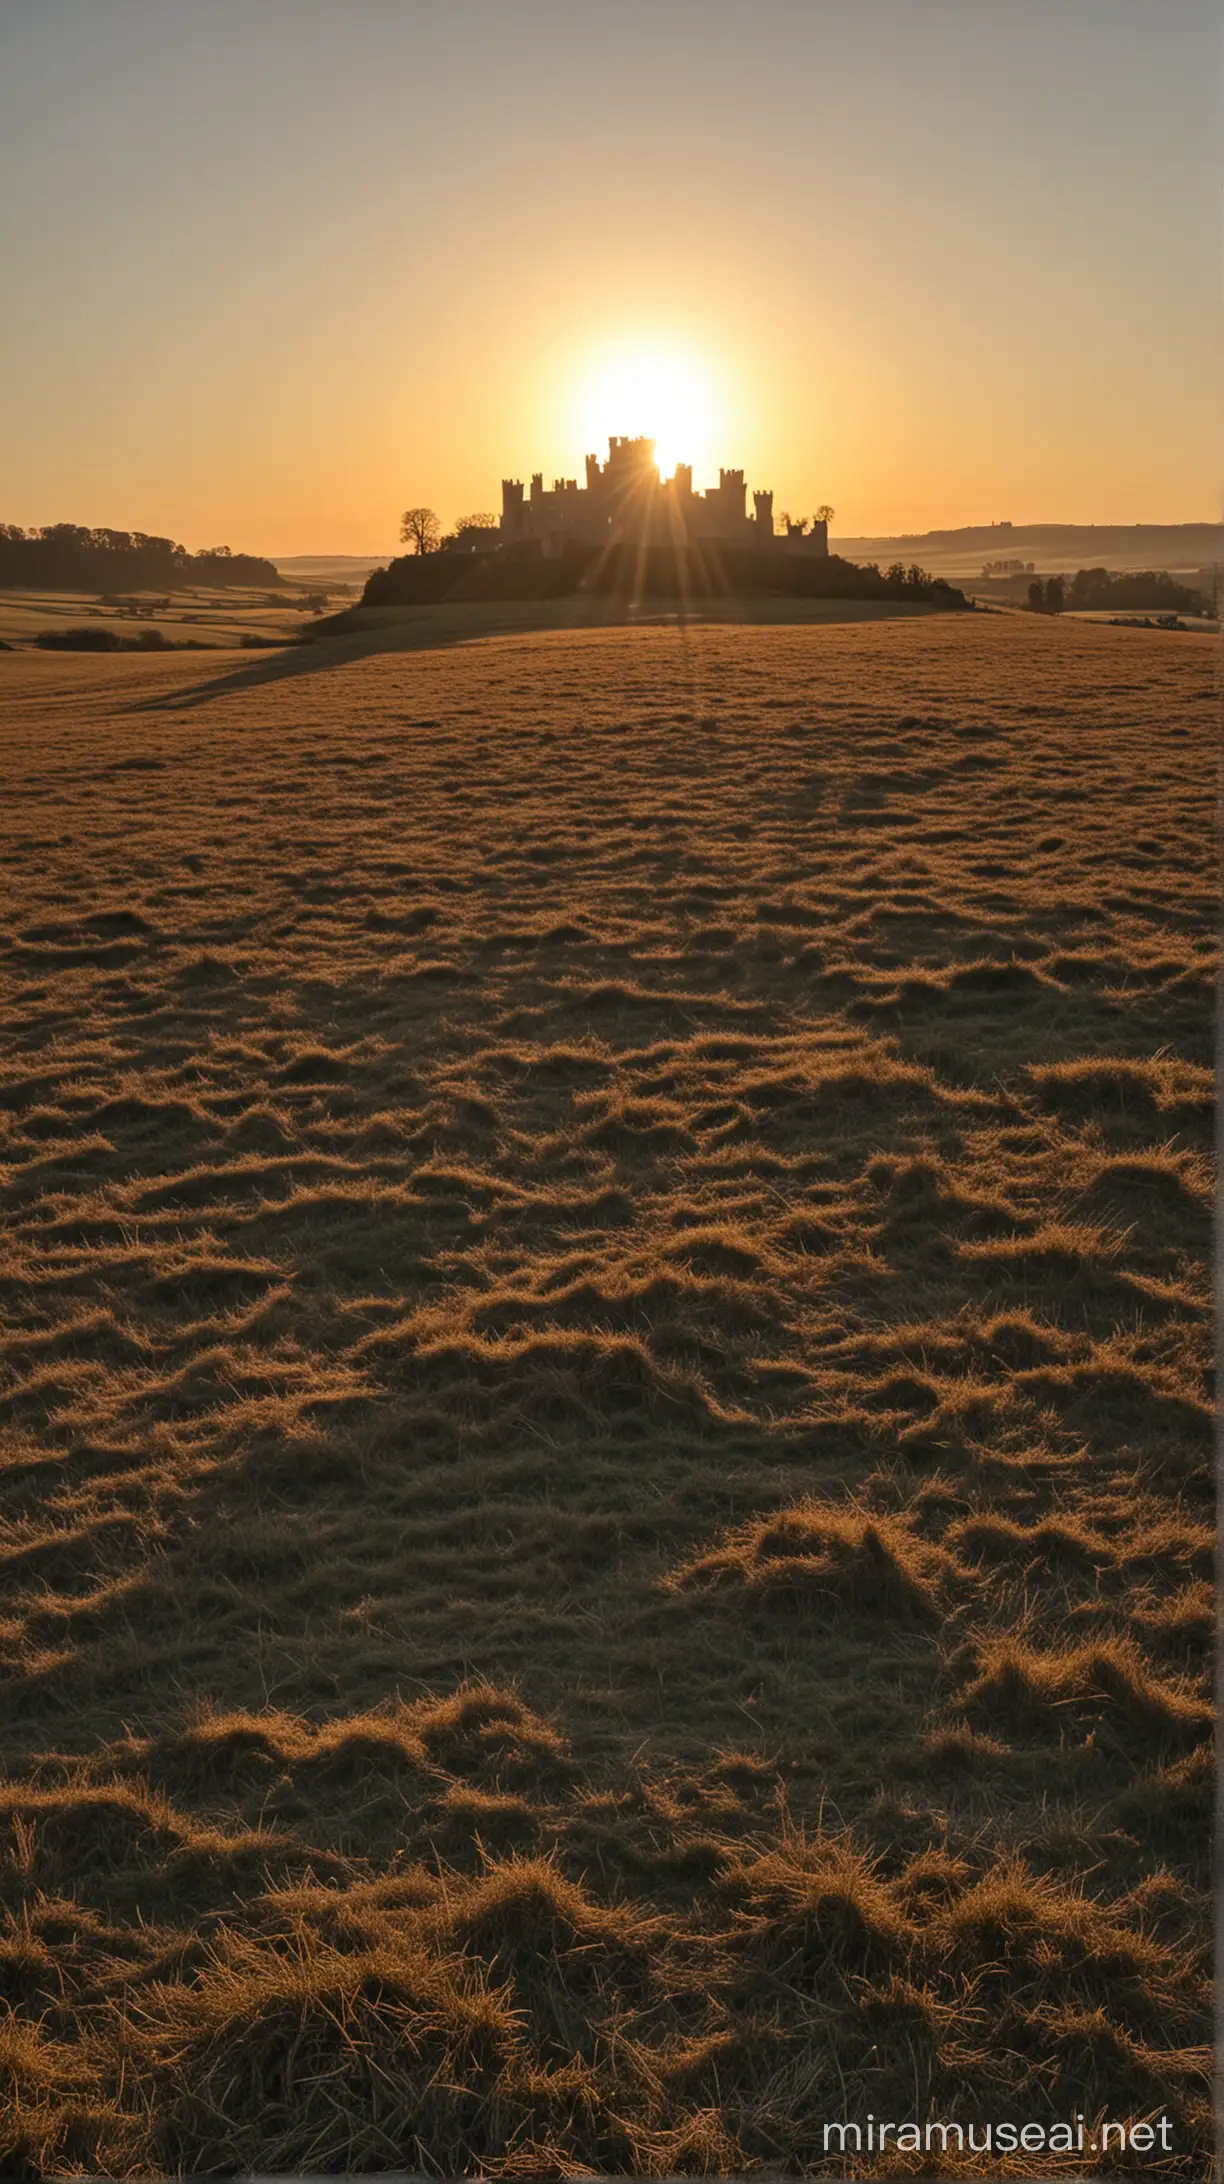 The sun setting behind the castle, casting long shadows over the land.